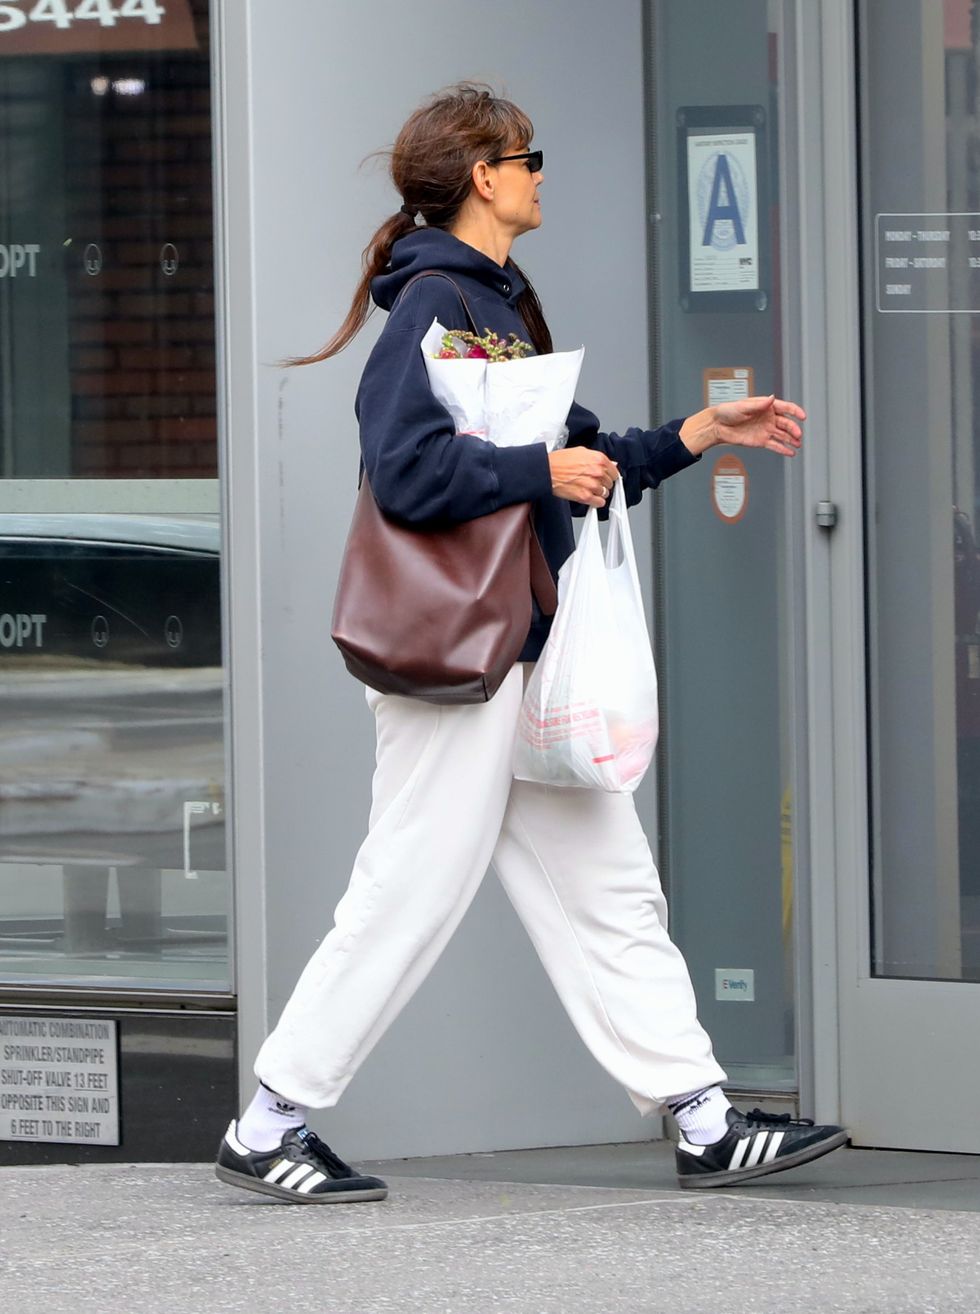 See How Celebrities Are Wearing Adidas Superstars